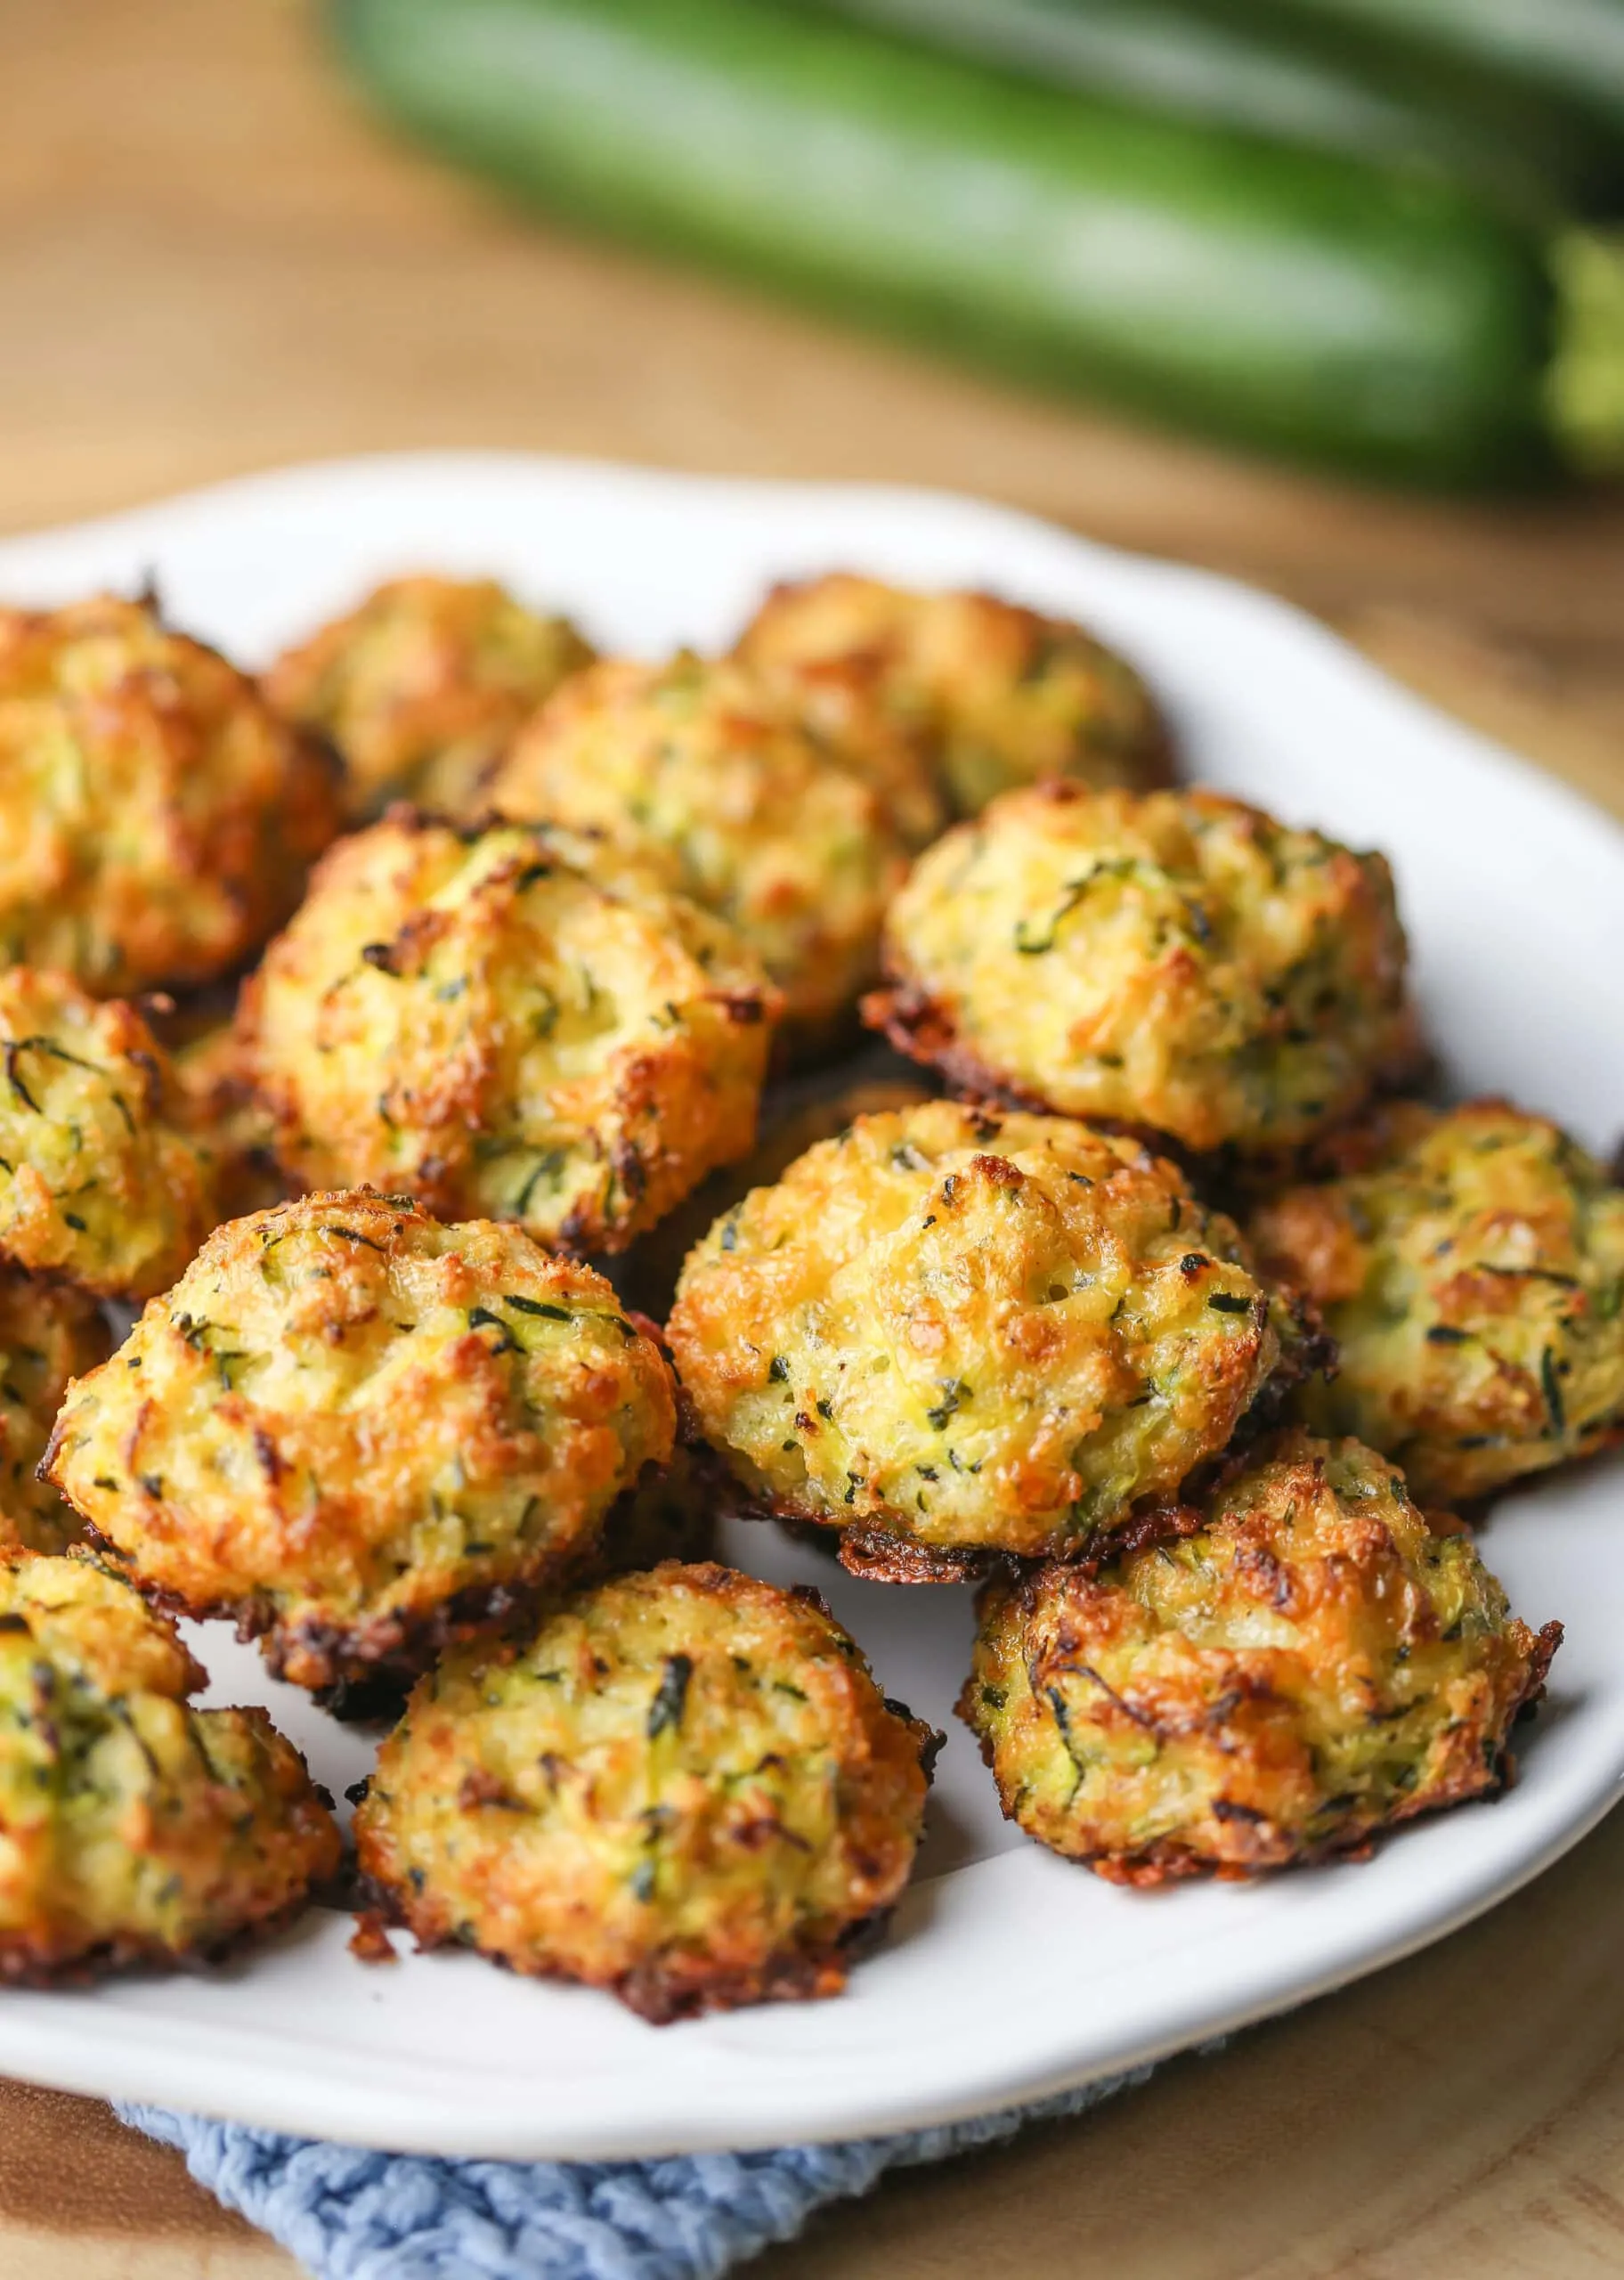 Golden-brown cheesy baked zucchini bites on a white plate.